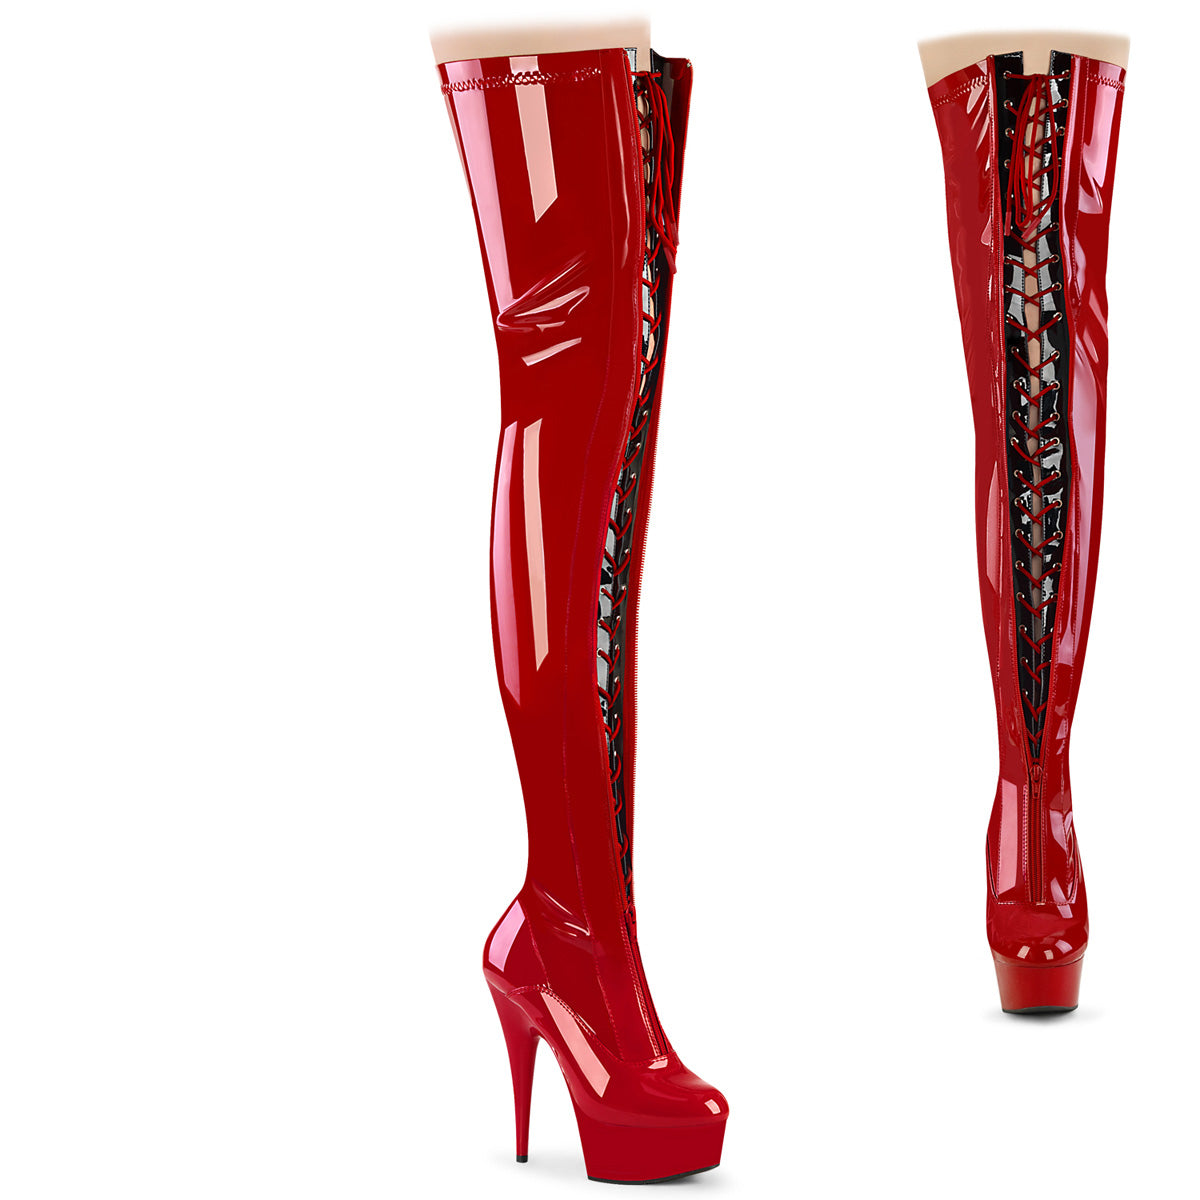 DELIGHT-3027 Red-Black Thigh Boots